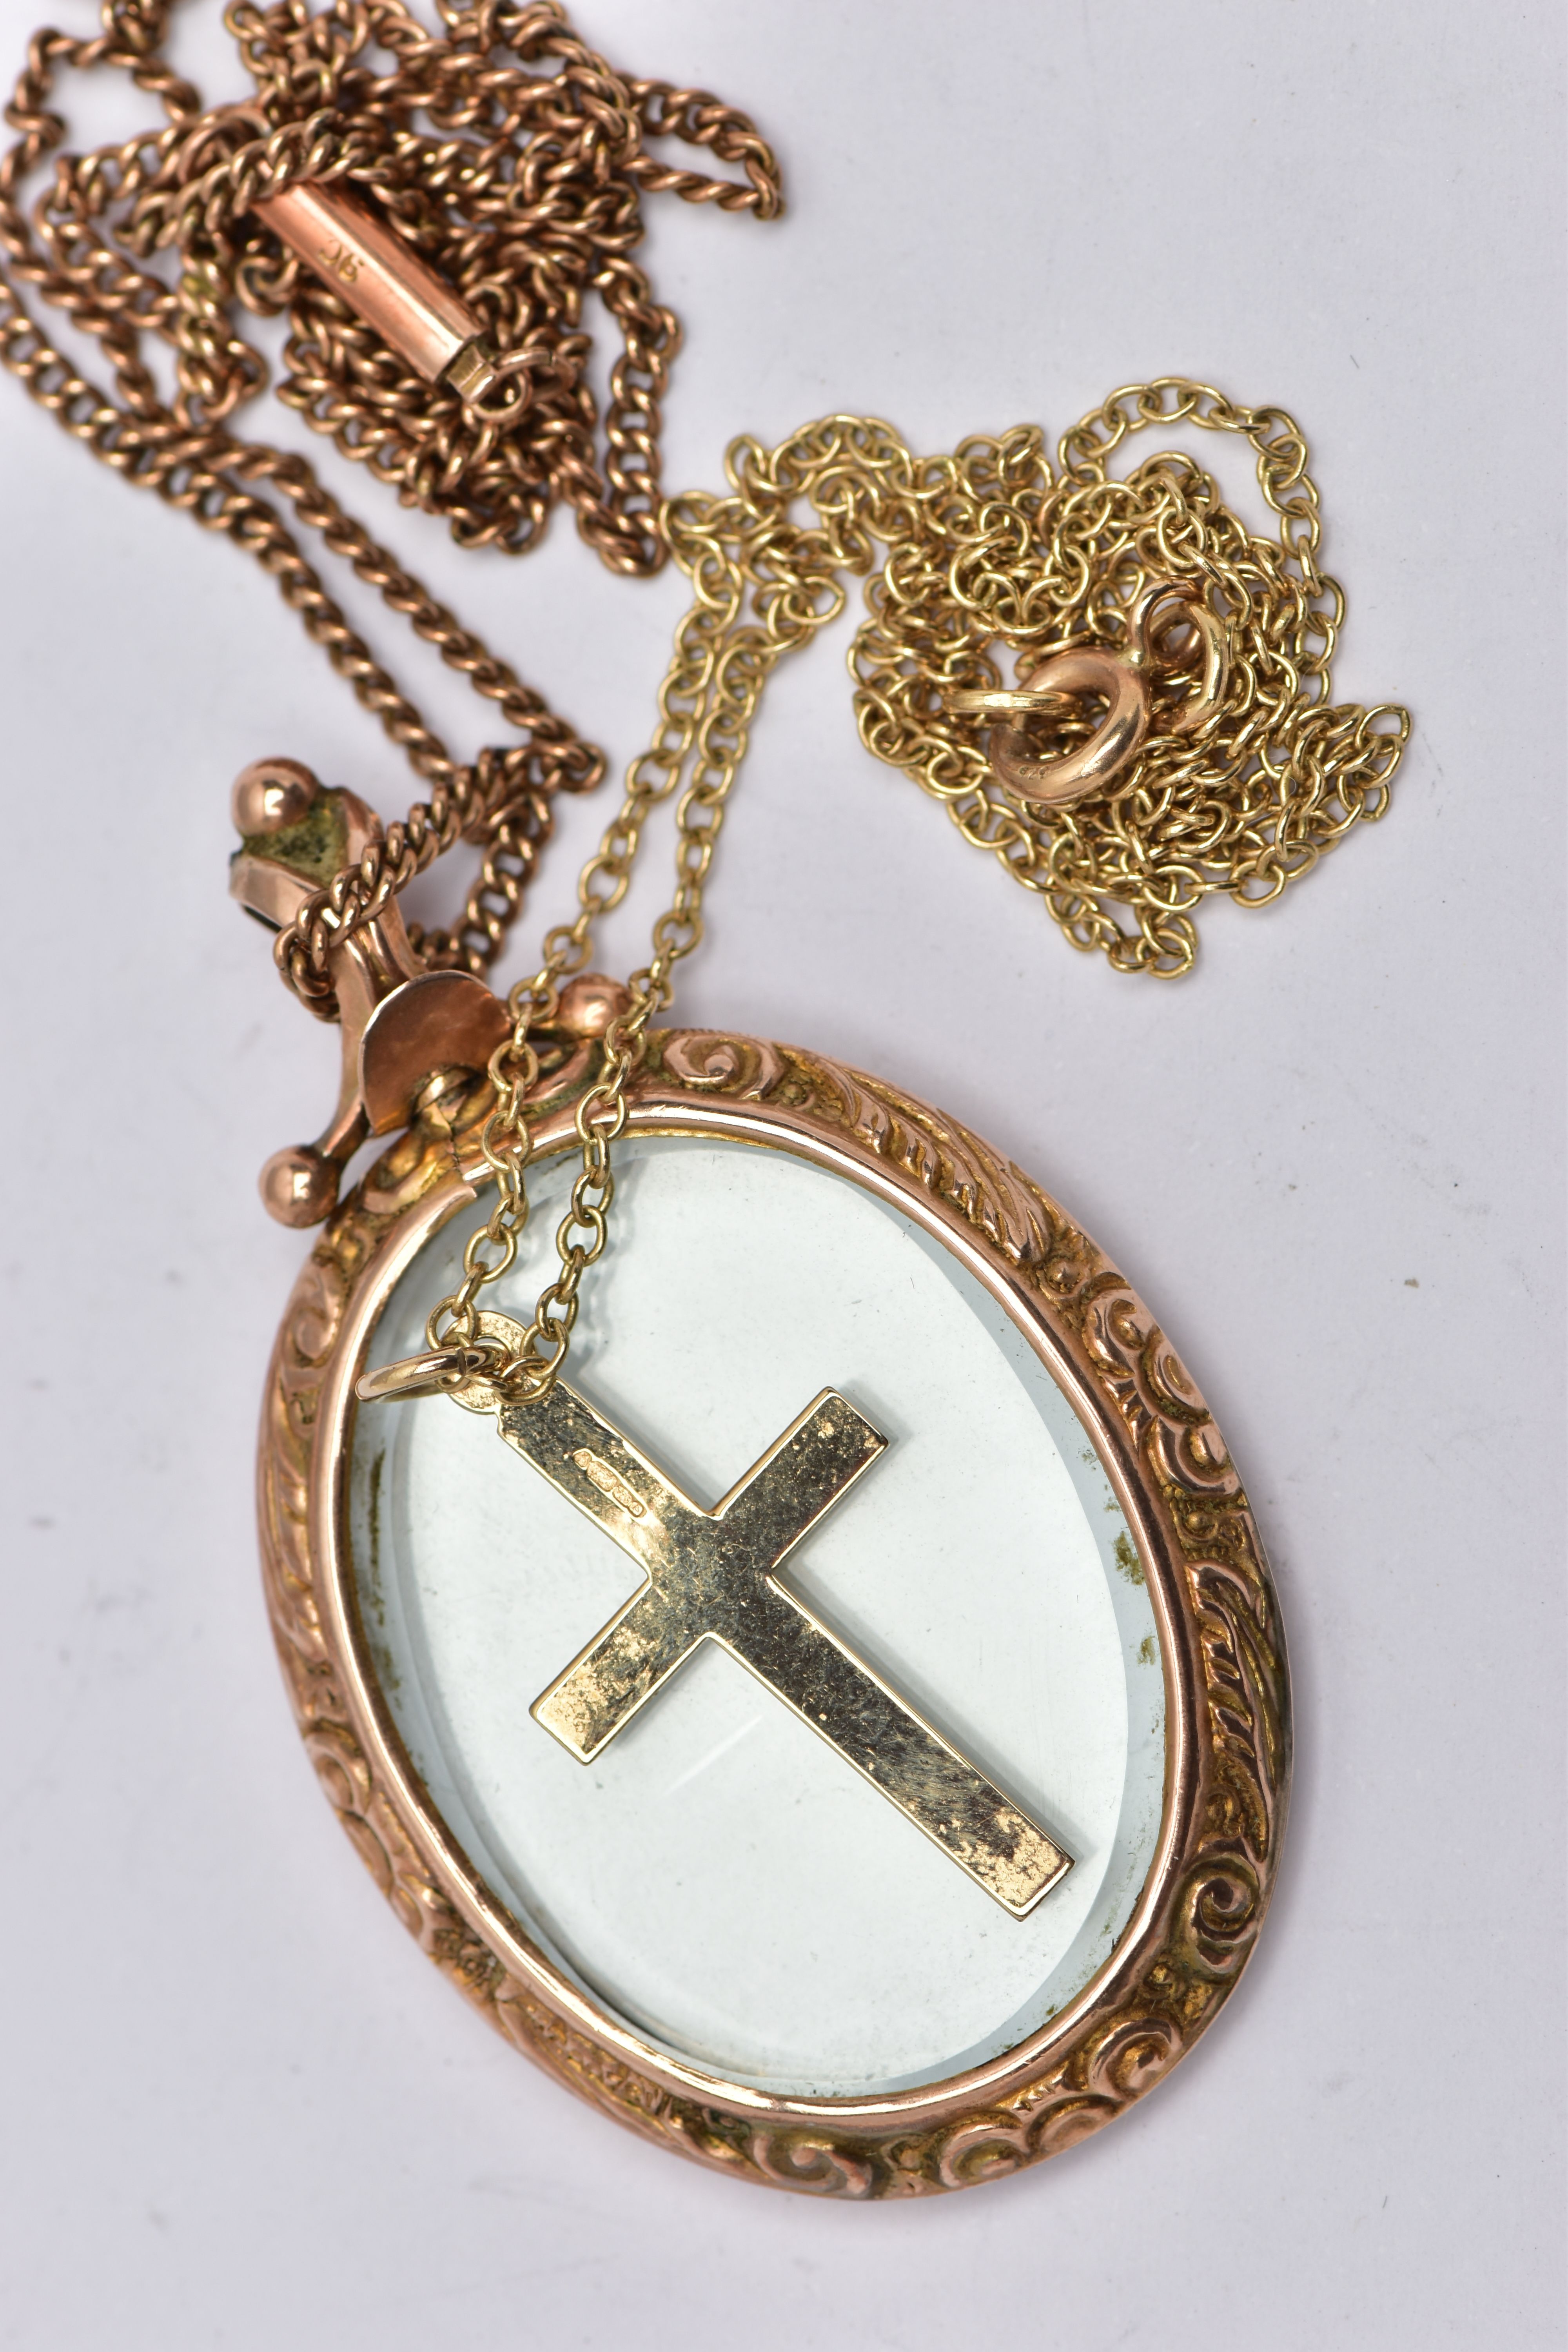 AN EARLY 20TH CENTURY 9CT GOLD PENDANT WITH 9CT GOLD CHAIN, A 9CT GOLD CROSS PENDANT WITH 9CT GOLD - Image 2 of 2